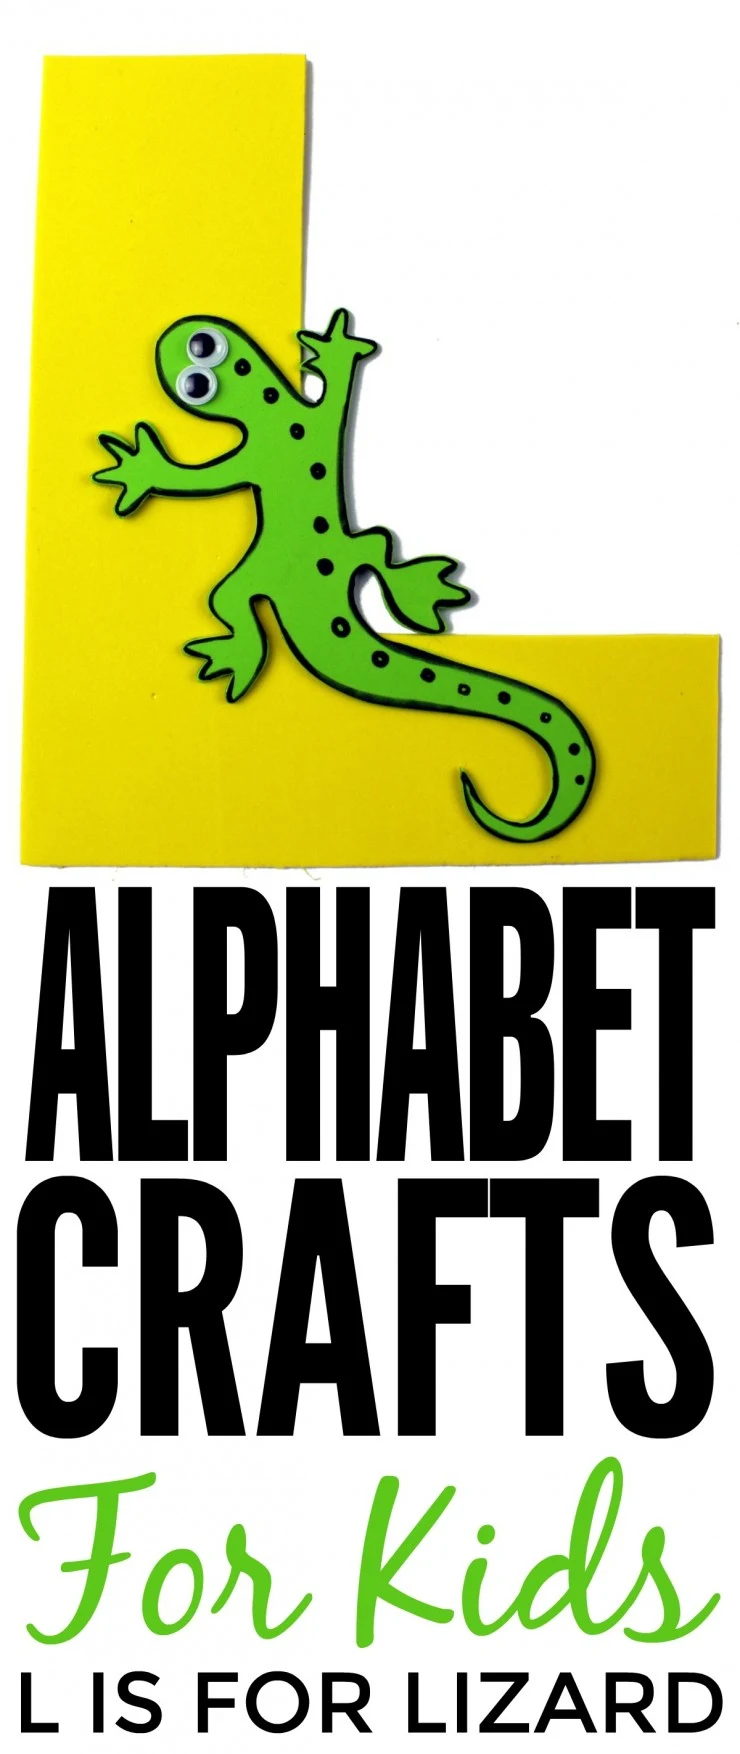 This week in my series of ABCs kids crafts featuring the Alphabet, we are doing a L is for Lizard craft. These Alphabet Crafts For Kids are a fun way to introduce your child to the alphabet.